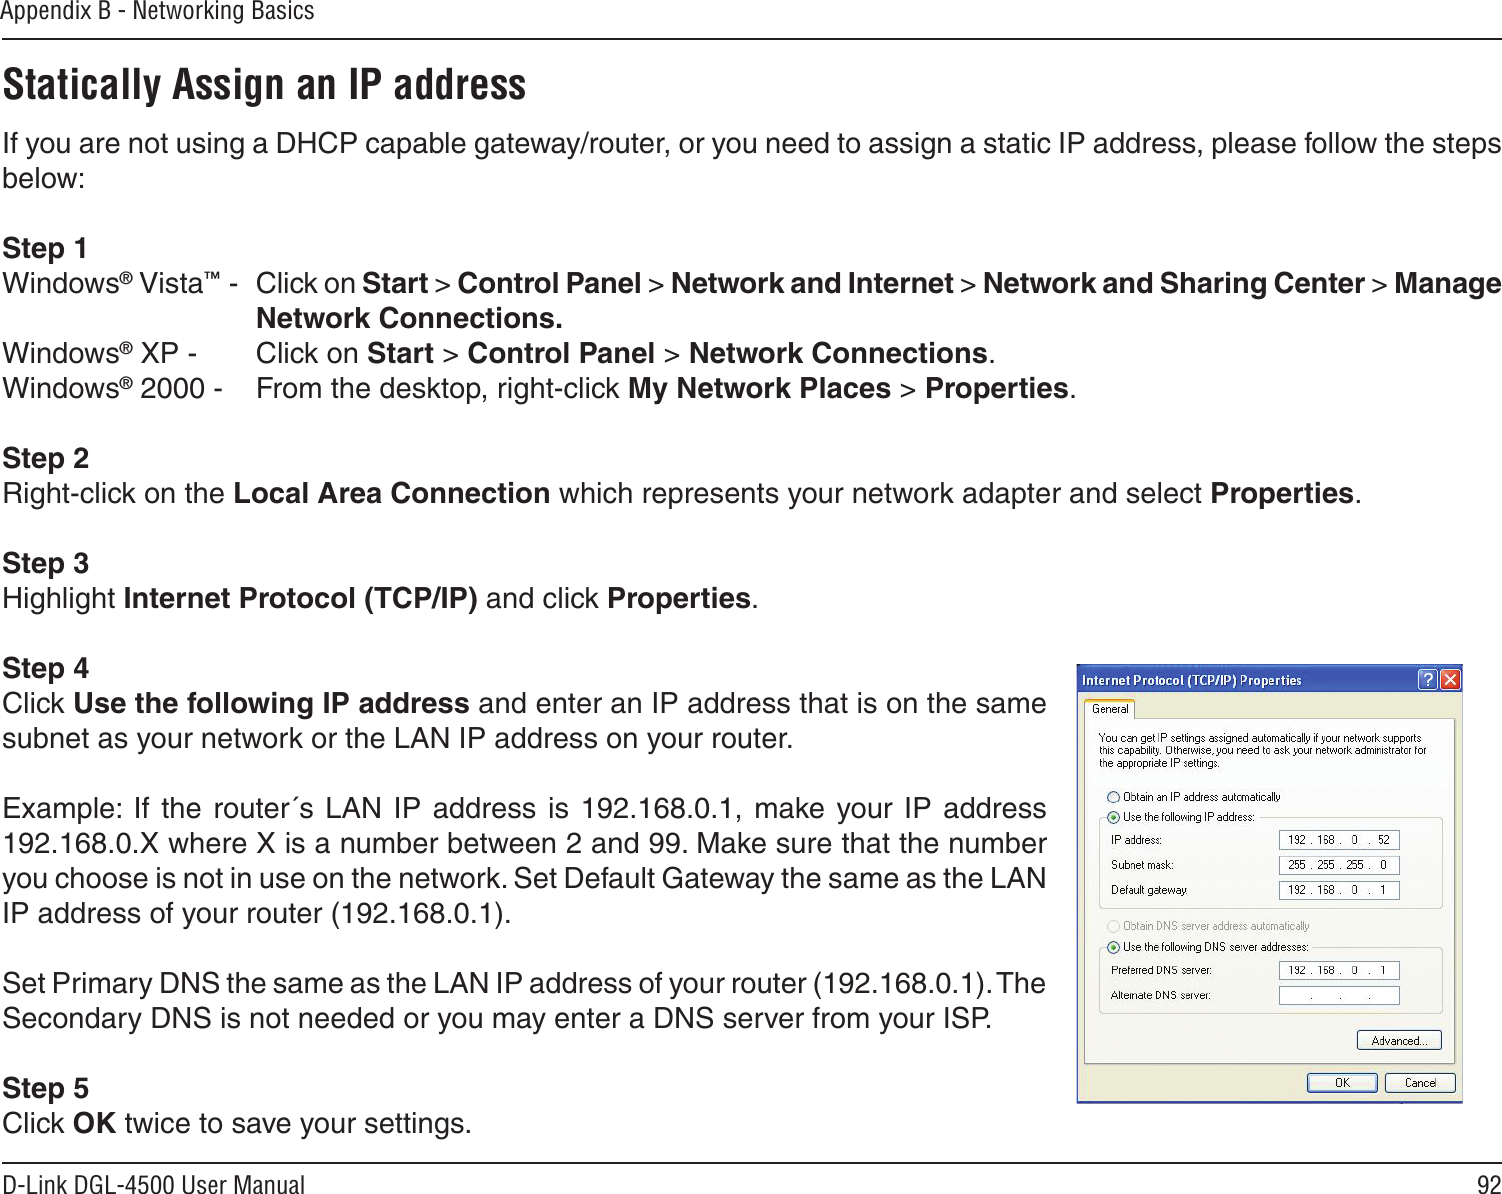 92D-Link DGL-4500 User ManualAppendix B - Networking BasicsStatically Assign an IP addressIf you are not using a DHCP capable gateway/router, or you need to assign a static IP address, please follow the steps below:Step 1Windows® Vista™ -  Click on Start &gt; Control Panel &gt; Network and Internet &gt; Network and Sharing Center &gt; Manage Network Connections.Windows® XP -  Click on Start &gt; Control Panel &gt; Network Connections.Windows® 2000 -  From the desktop, right-click My Network Places &gt; Properties.Step 2Right-click on the Local Area Connection which represents your network adapter and select Properties.Step 3Highlight Internet Protocol (TCP/IP) and click Properties.Step 4Click Use the following IP address and enter an IP address that is on the same subnet as your network or the LAN IP address on your router. Example:  If  the  router´s  LAN  IP  address  is 192.168.0.1, make  your IP  address 192.168.0.X where X is a number between 2 and 99. Make sure that the number you choose is not in use on the network. Set Default Gateway the same as the LAN IP address of your router (192.168.0.1). Set Primary DNS the same as the LAN IP address of your router (192.168.0.1). The Secondary DNS is not needed or you may enter a DNS server from your ISP.Step 5Click OK twice to save your settings.